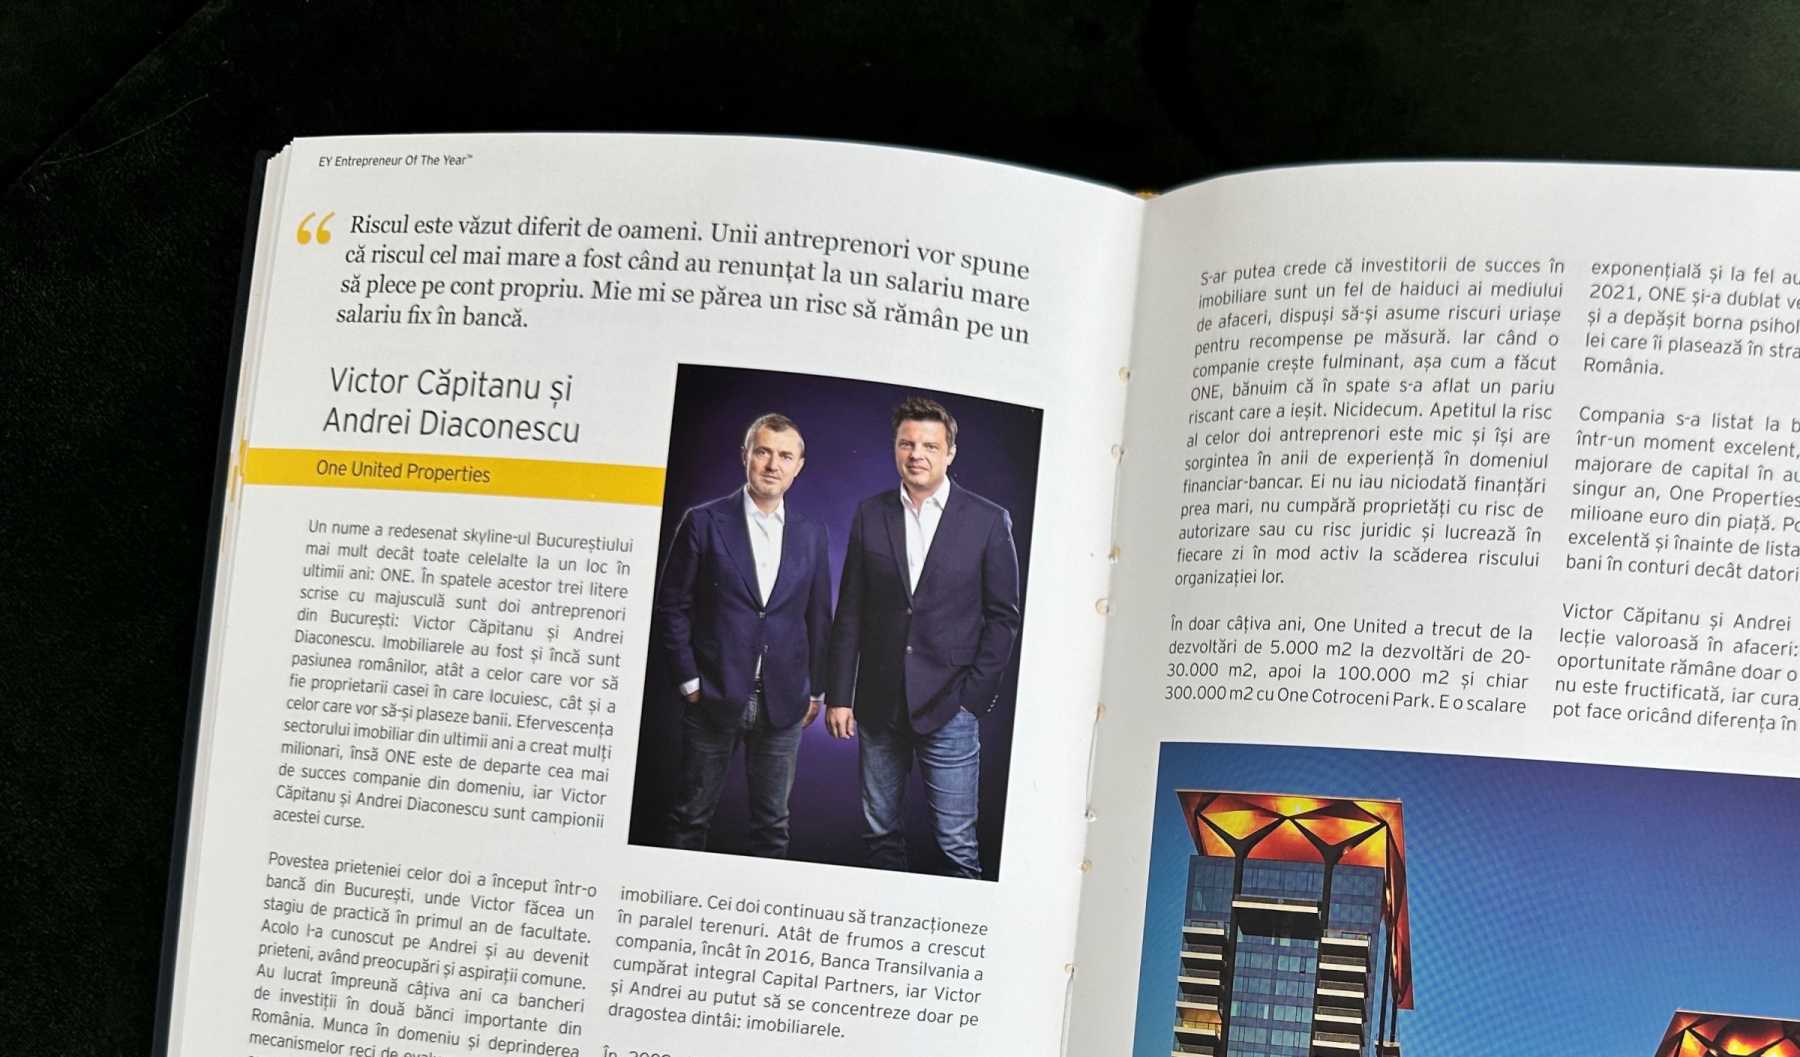 One United Properties founders featured in EY Entrepreneurs Book